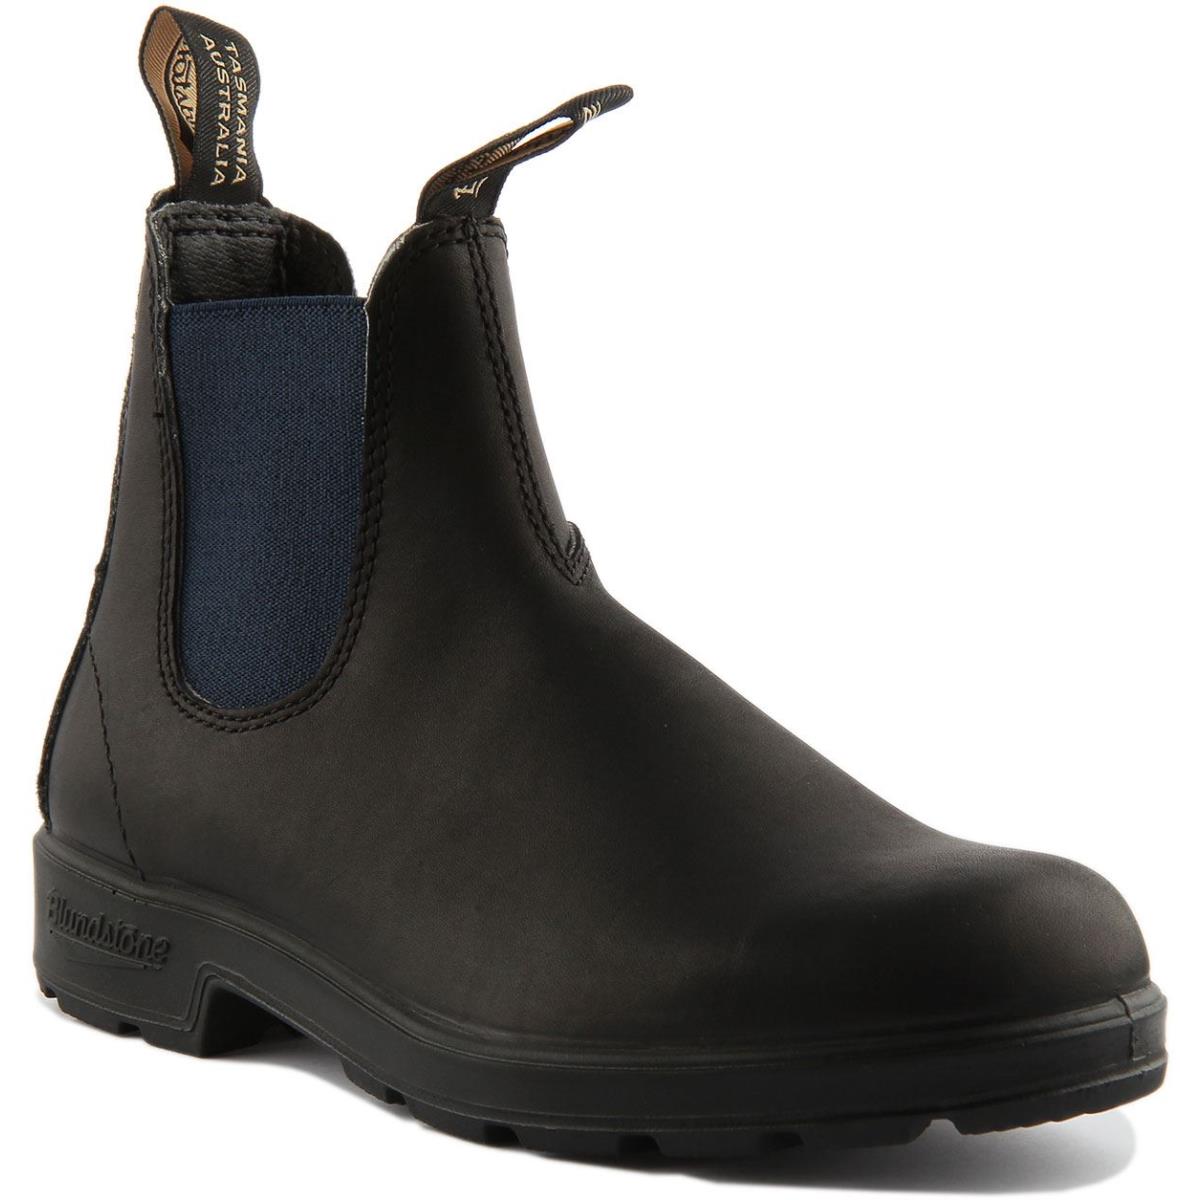 Blundstone 1917 Unisex Pull On Leather Chelsea Boot In Black Blue Size US 5 - 11 BLACK BLUE